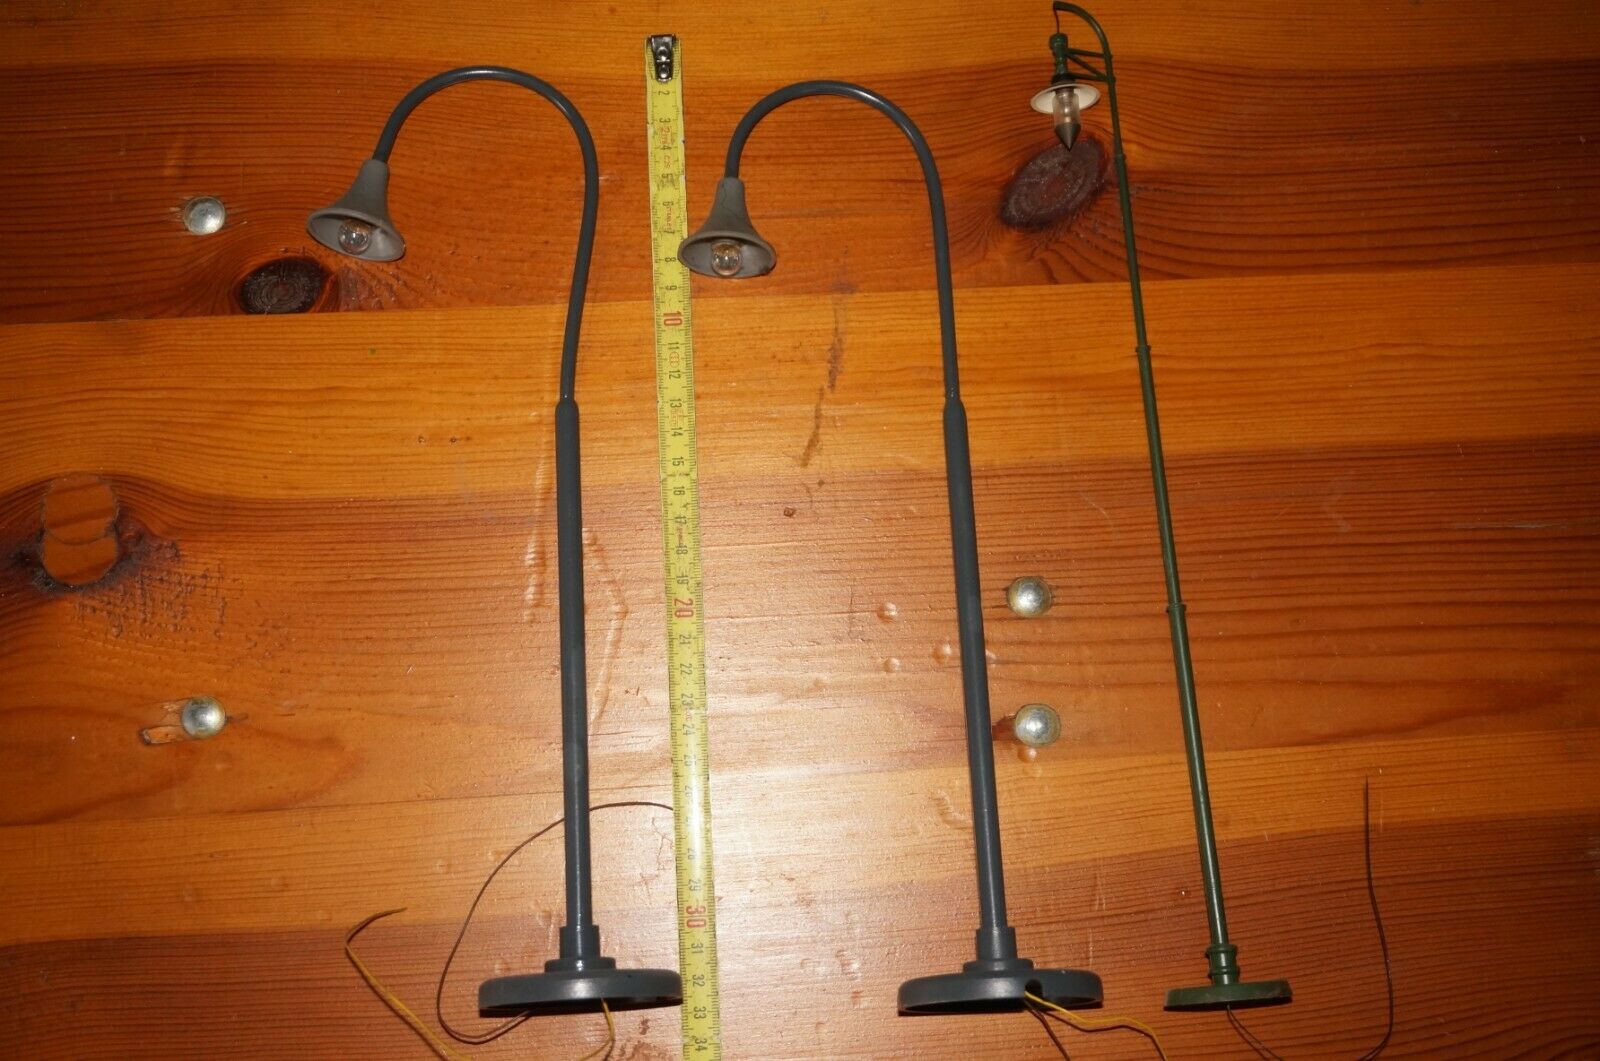 Rfb ] 3x Arc Lamps Manufacturer Unknown Gauge G 13 3/8in And 12 5/8in Height S.